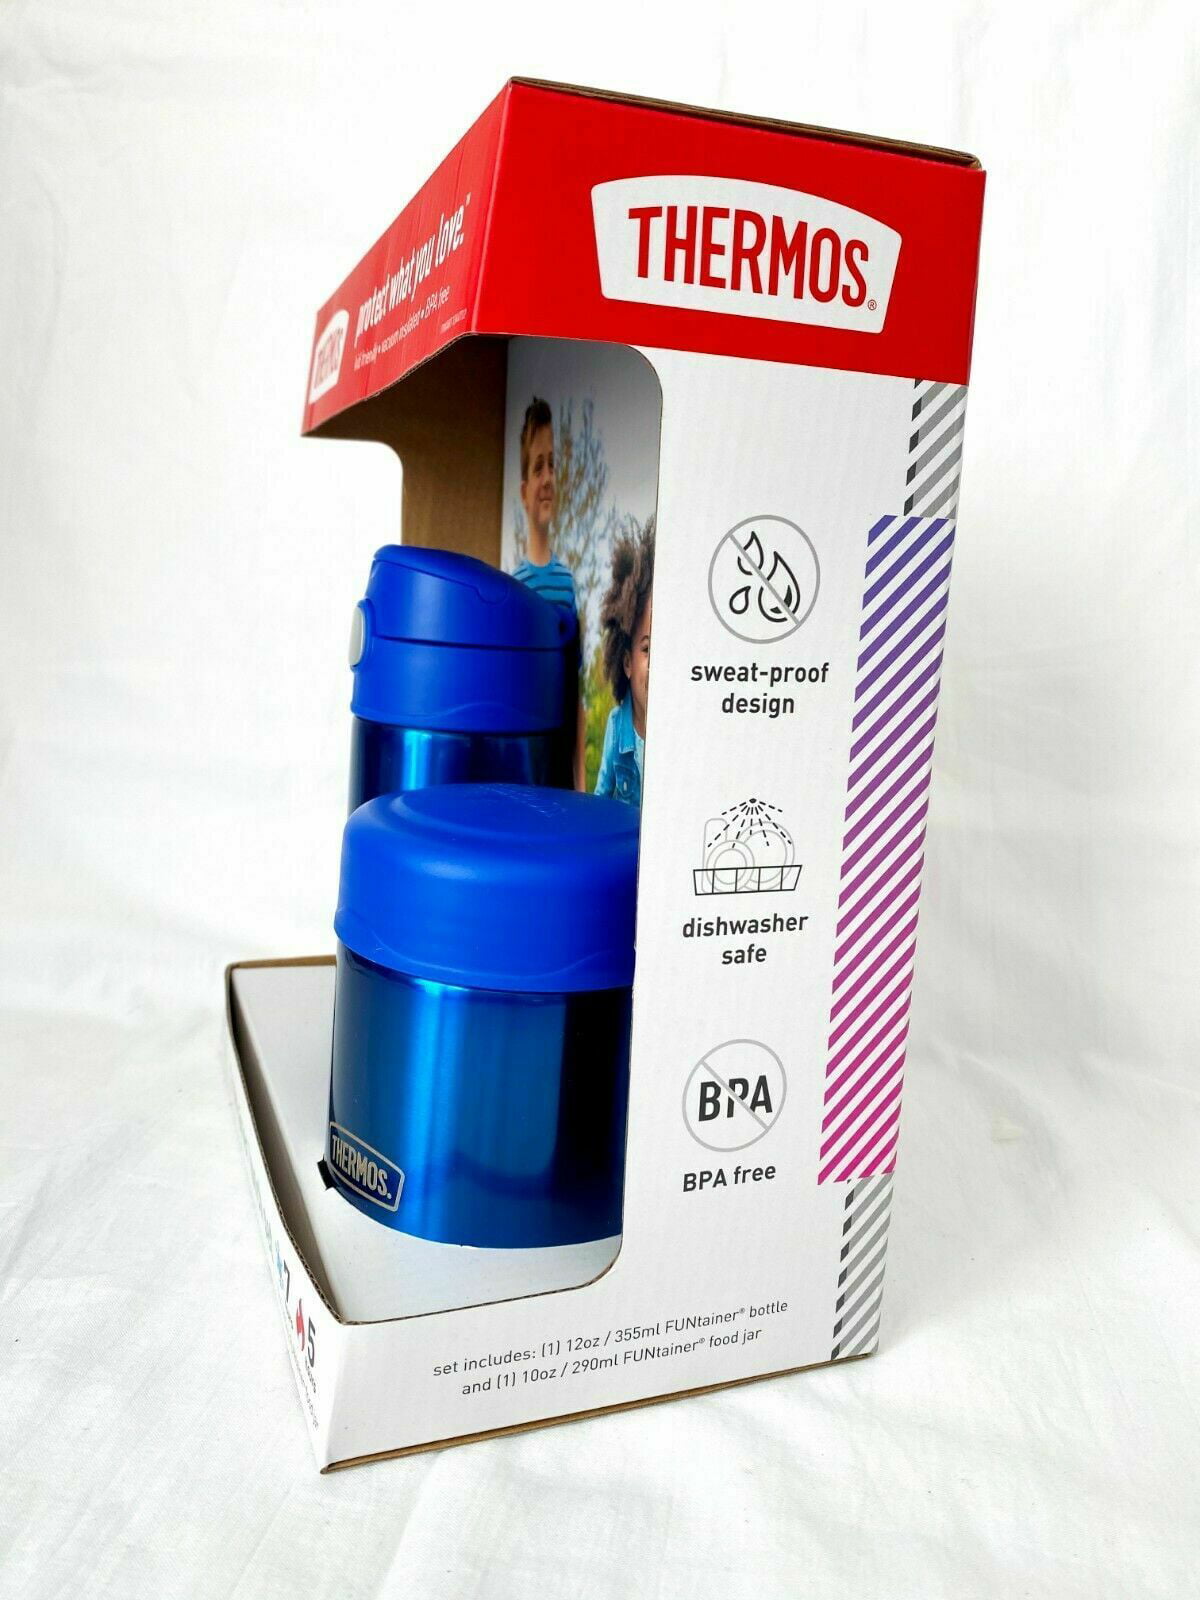 Bento School Lunches : Review: Thermos FUNtainer Food Jar and Bottle,  Japanese style fried rice